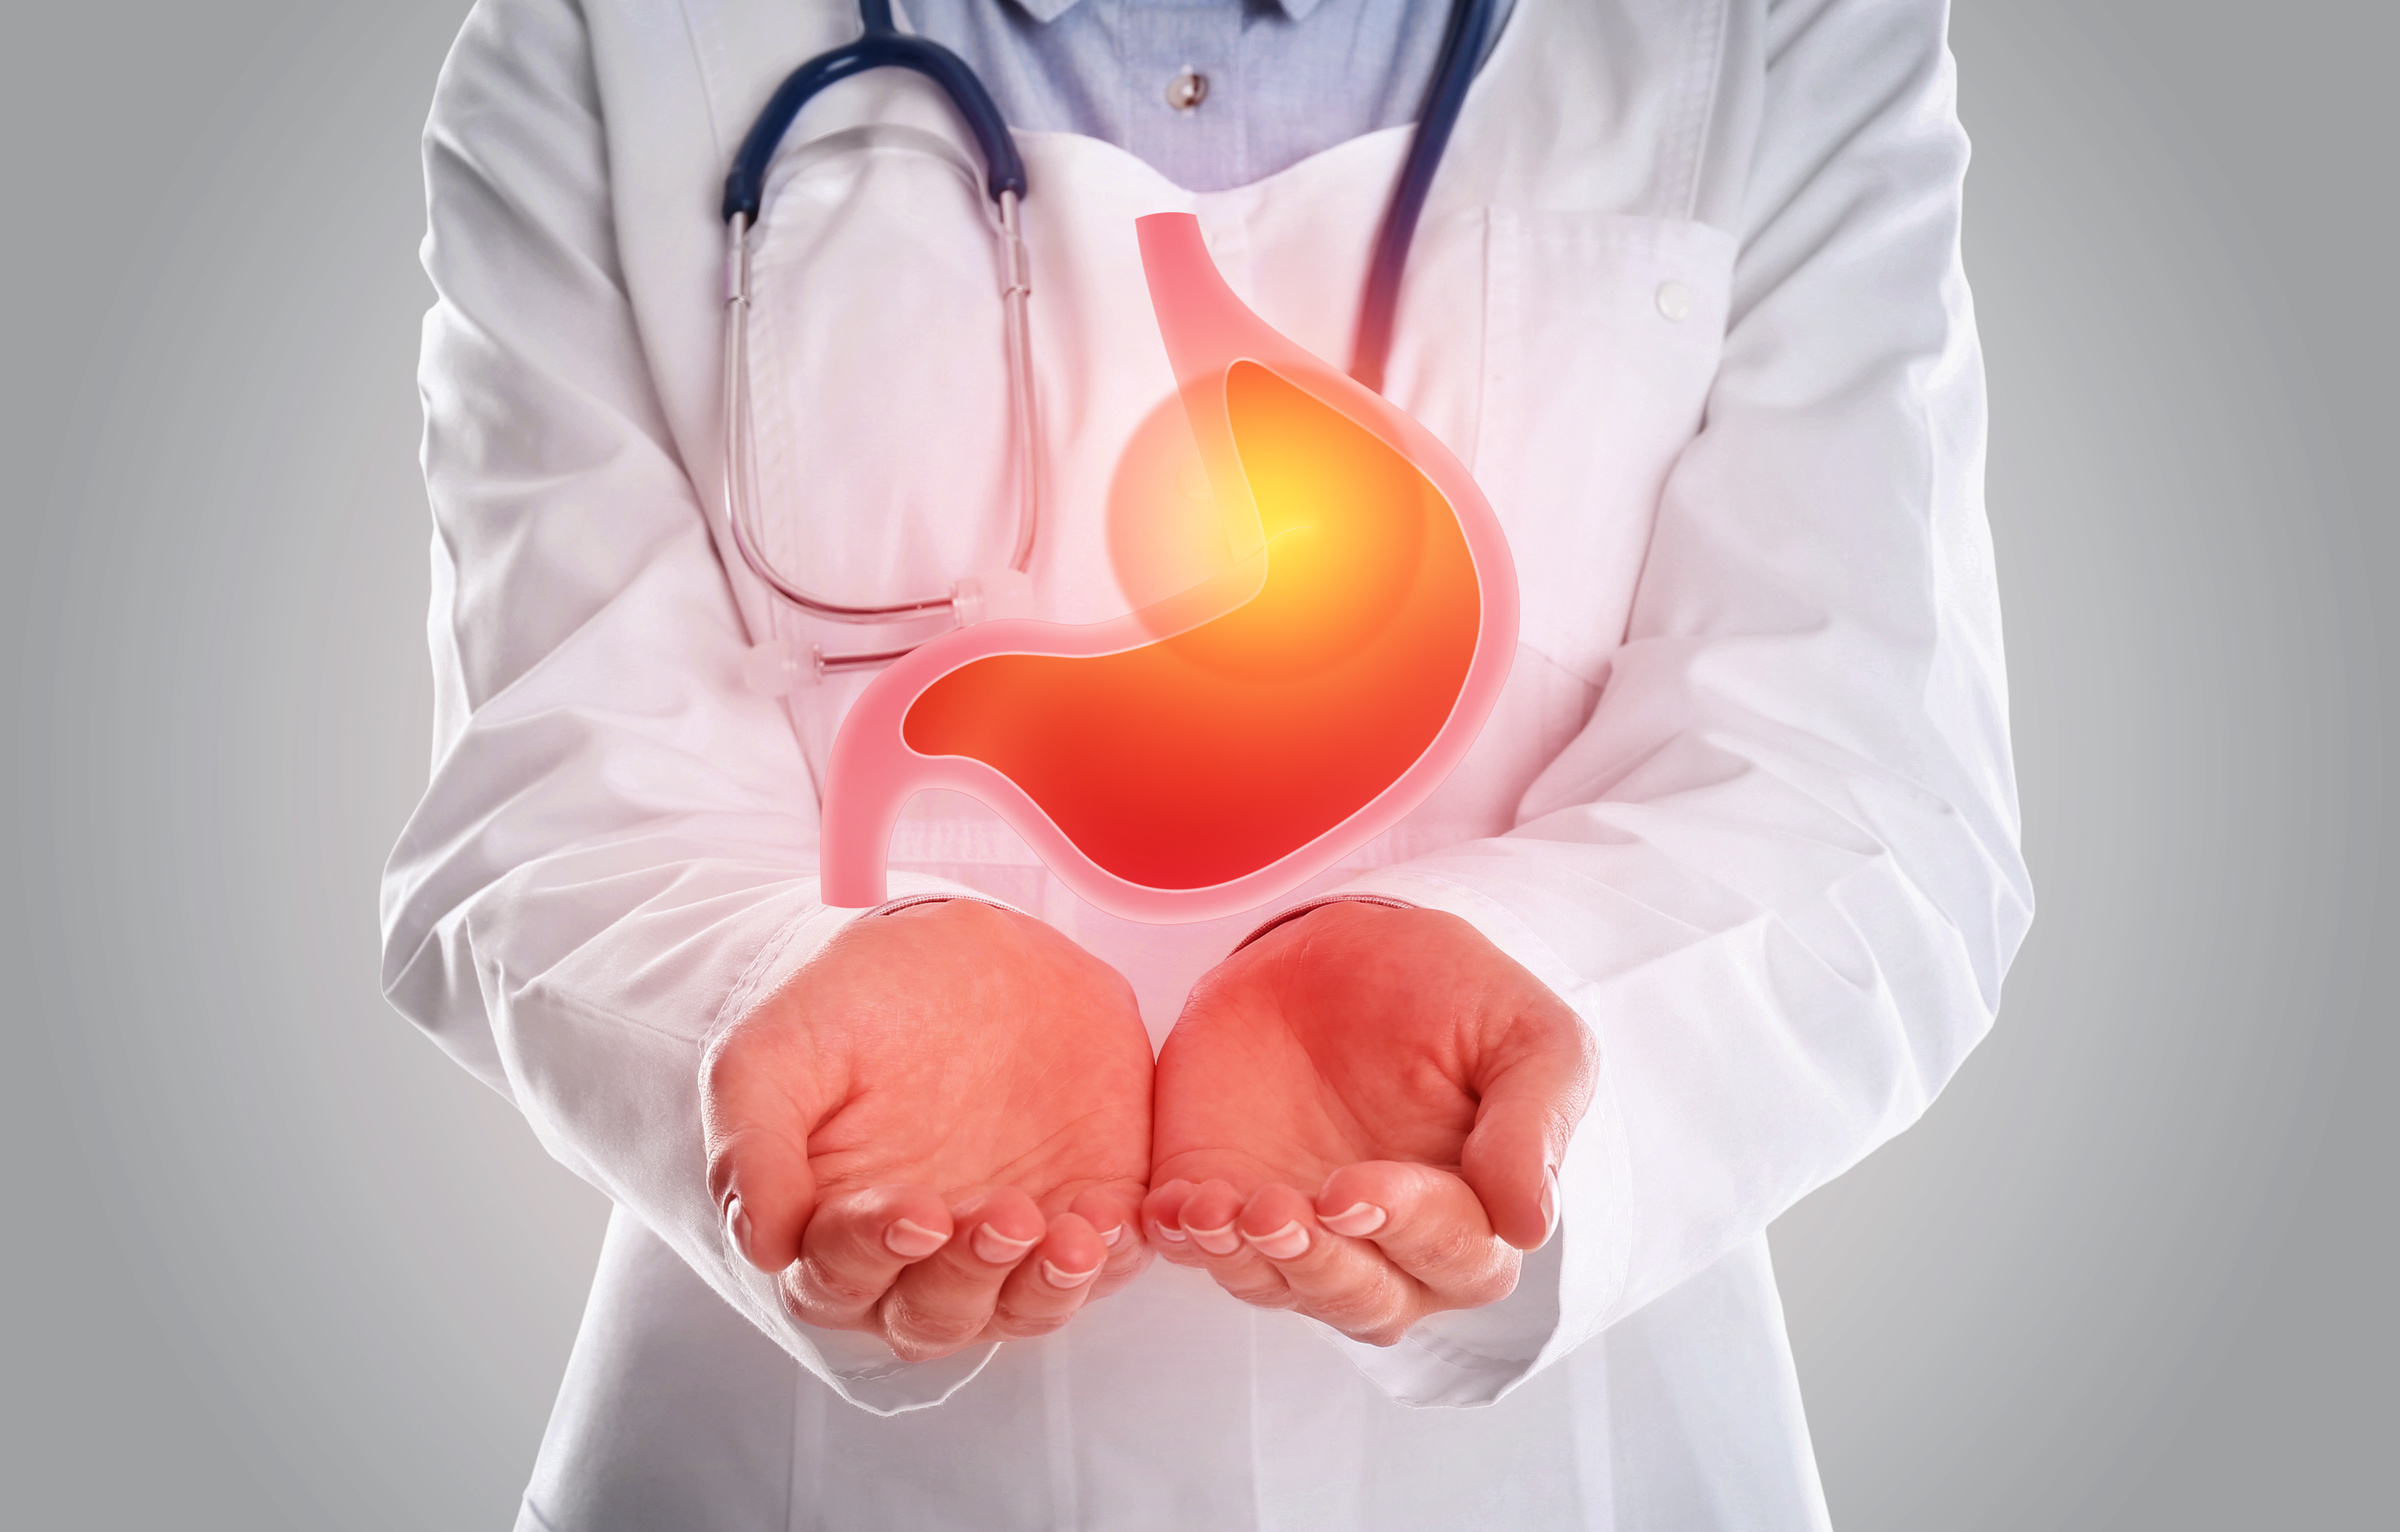 Treatment of Heartburn and Other Gastrointestinal Diseases. Doctor Holding Stomach Illustration on Grey Background, Closeup